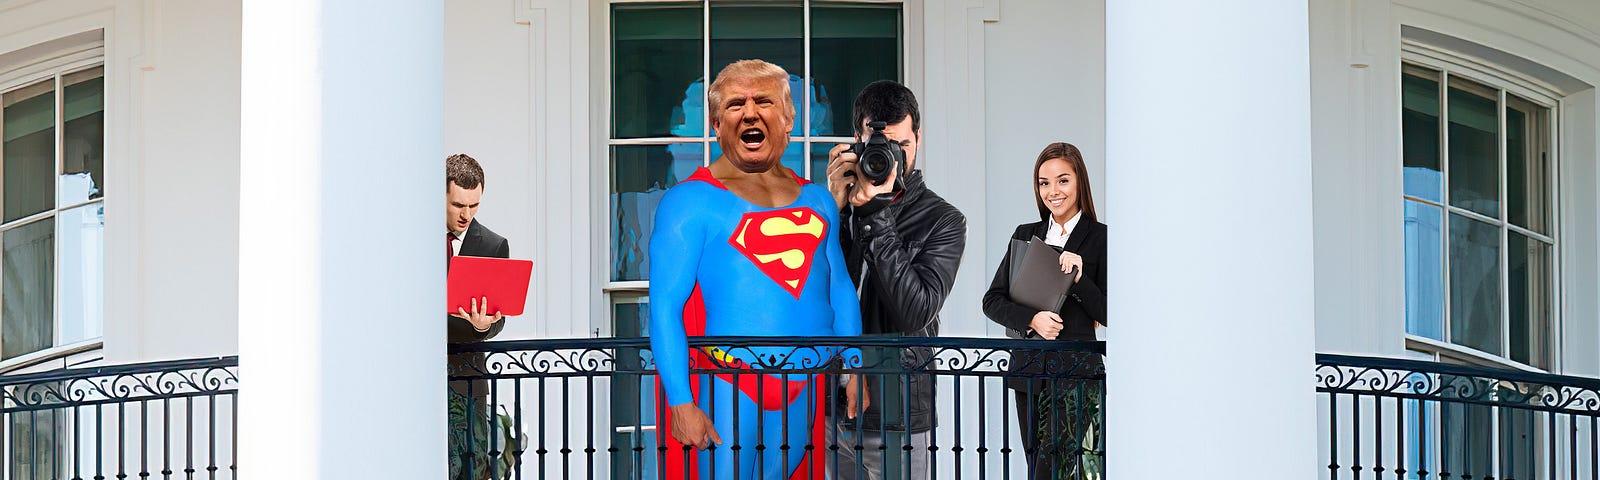 Trump on White House balcony in Superman suit.